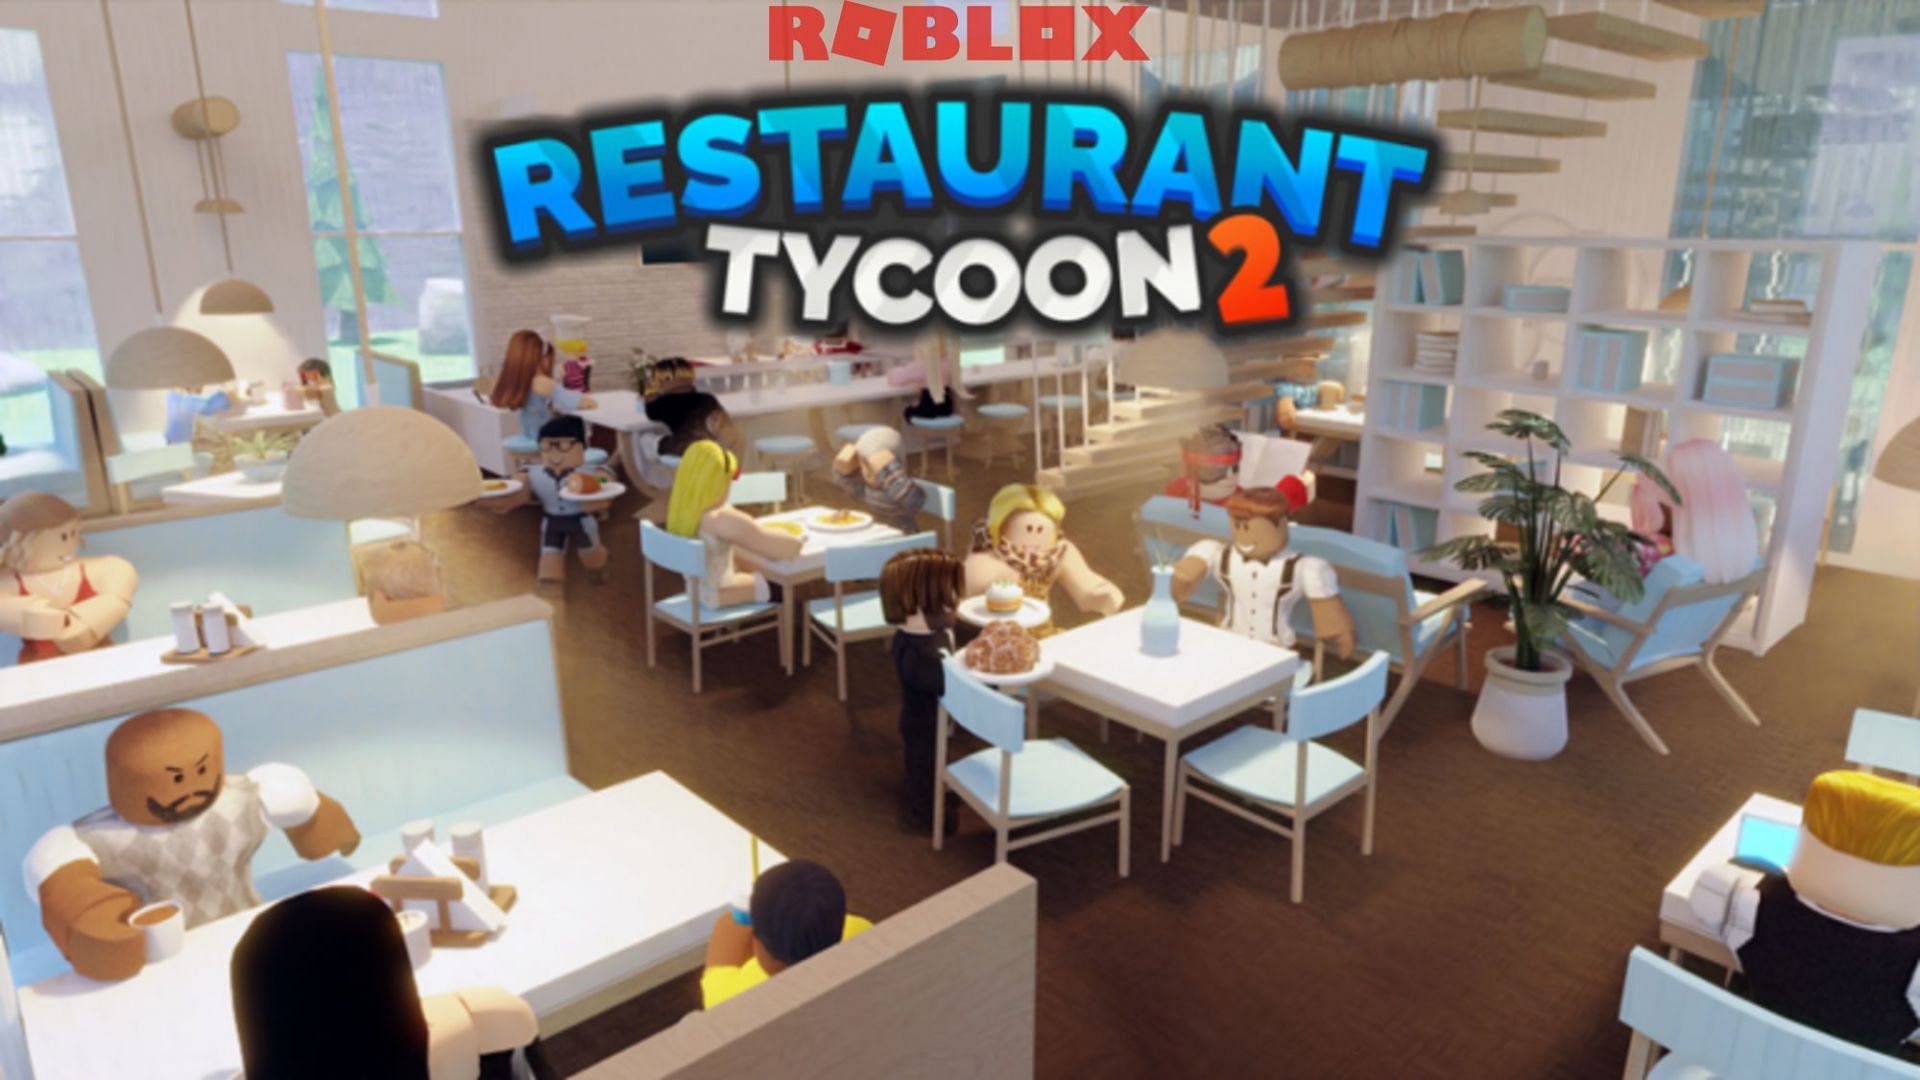 Restaurant Tycoon 2 codes in Roblox Free Diamonds, Cash, and more